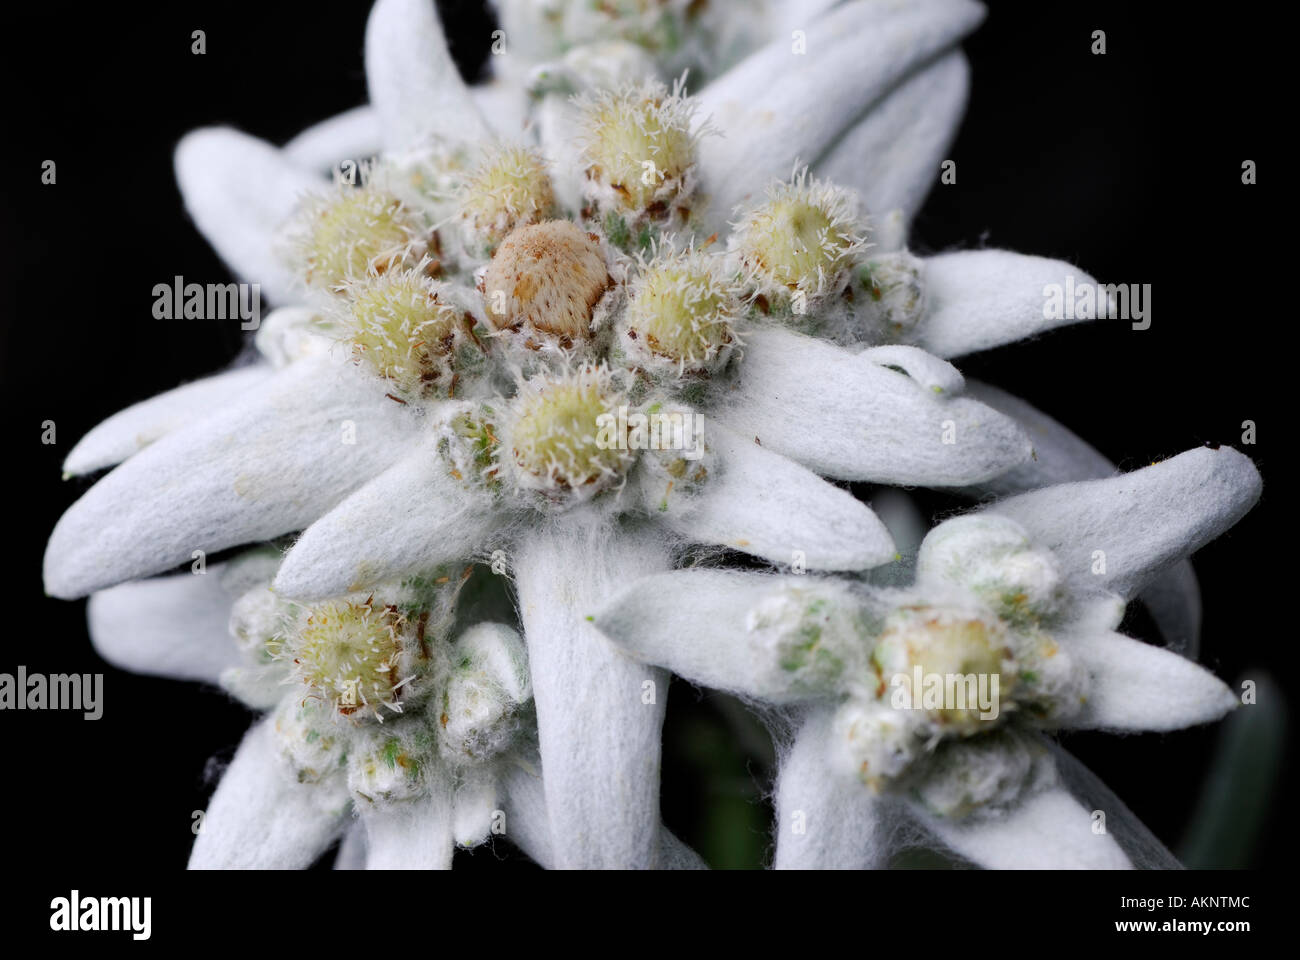 Close up of alpine Edelweiss flowers with white woolly leaves Stock Photo